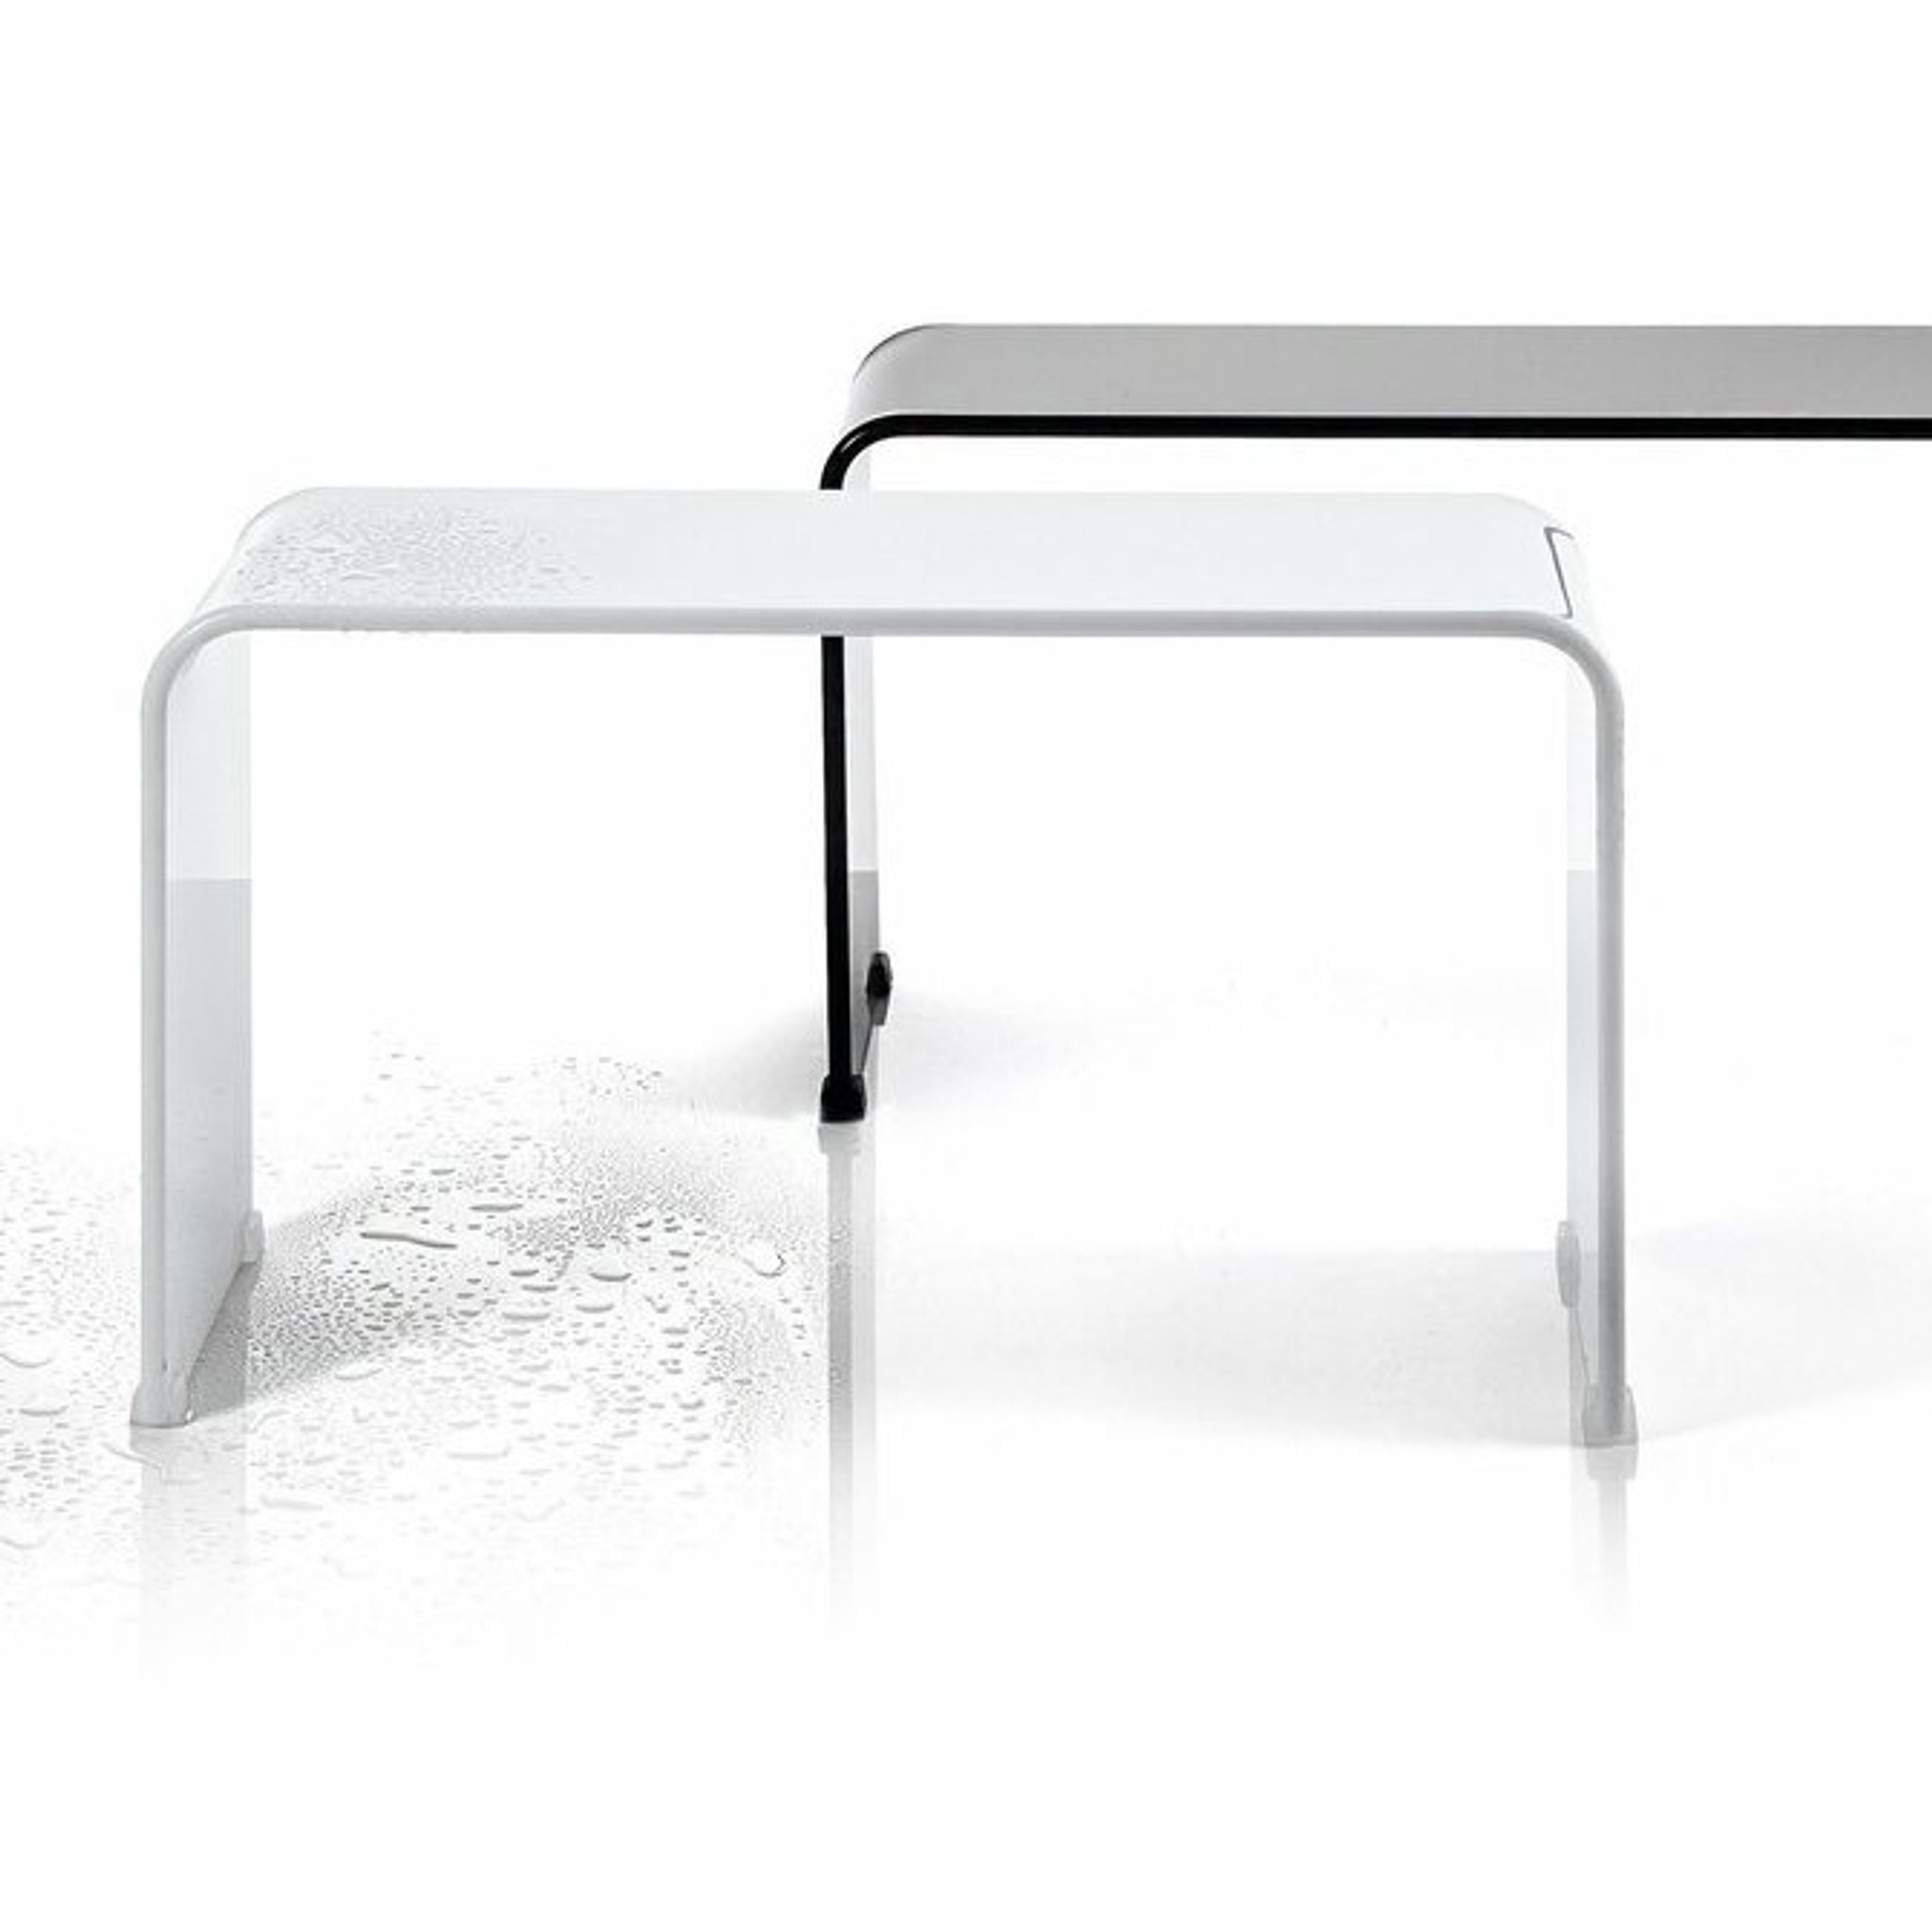 Shower Bench Backless chair bench Bathroom Shower Seat Shiny Acrylic lucite black white